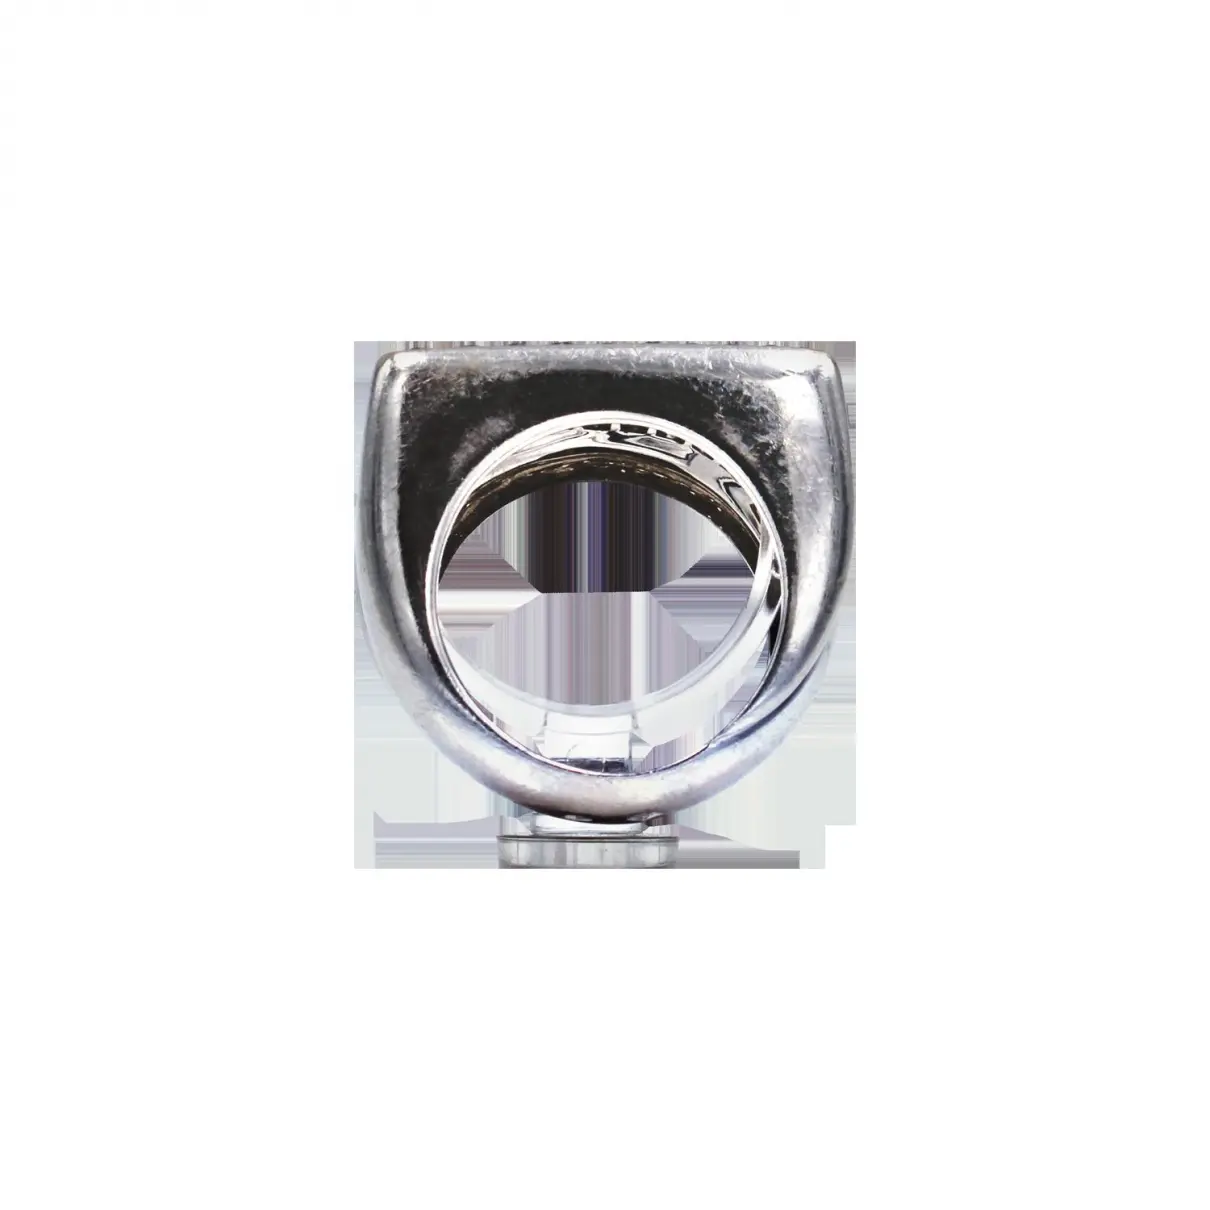 Buy Fred Success white gold ring online